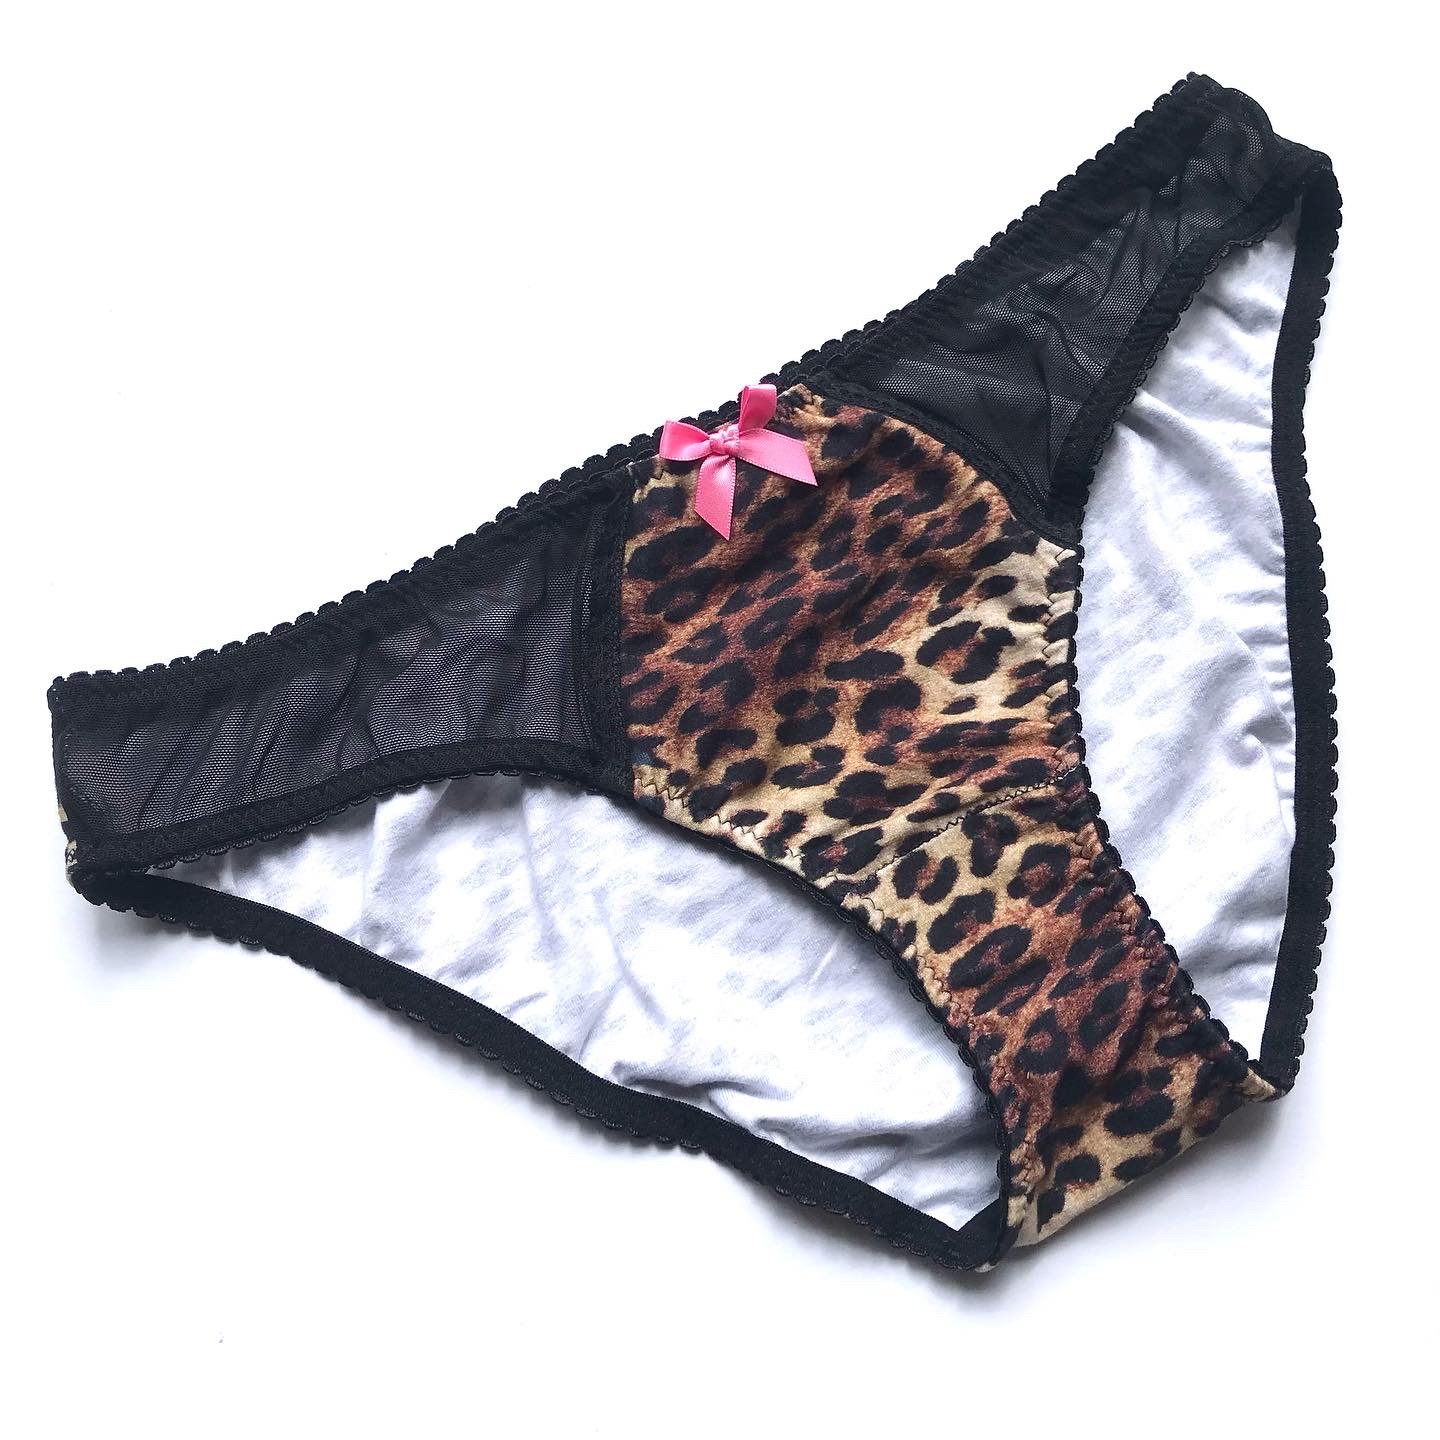 Pocket Panties - Leopard Print | Hid-In Classic Shop - variety of ...